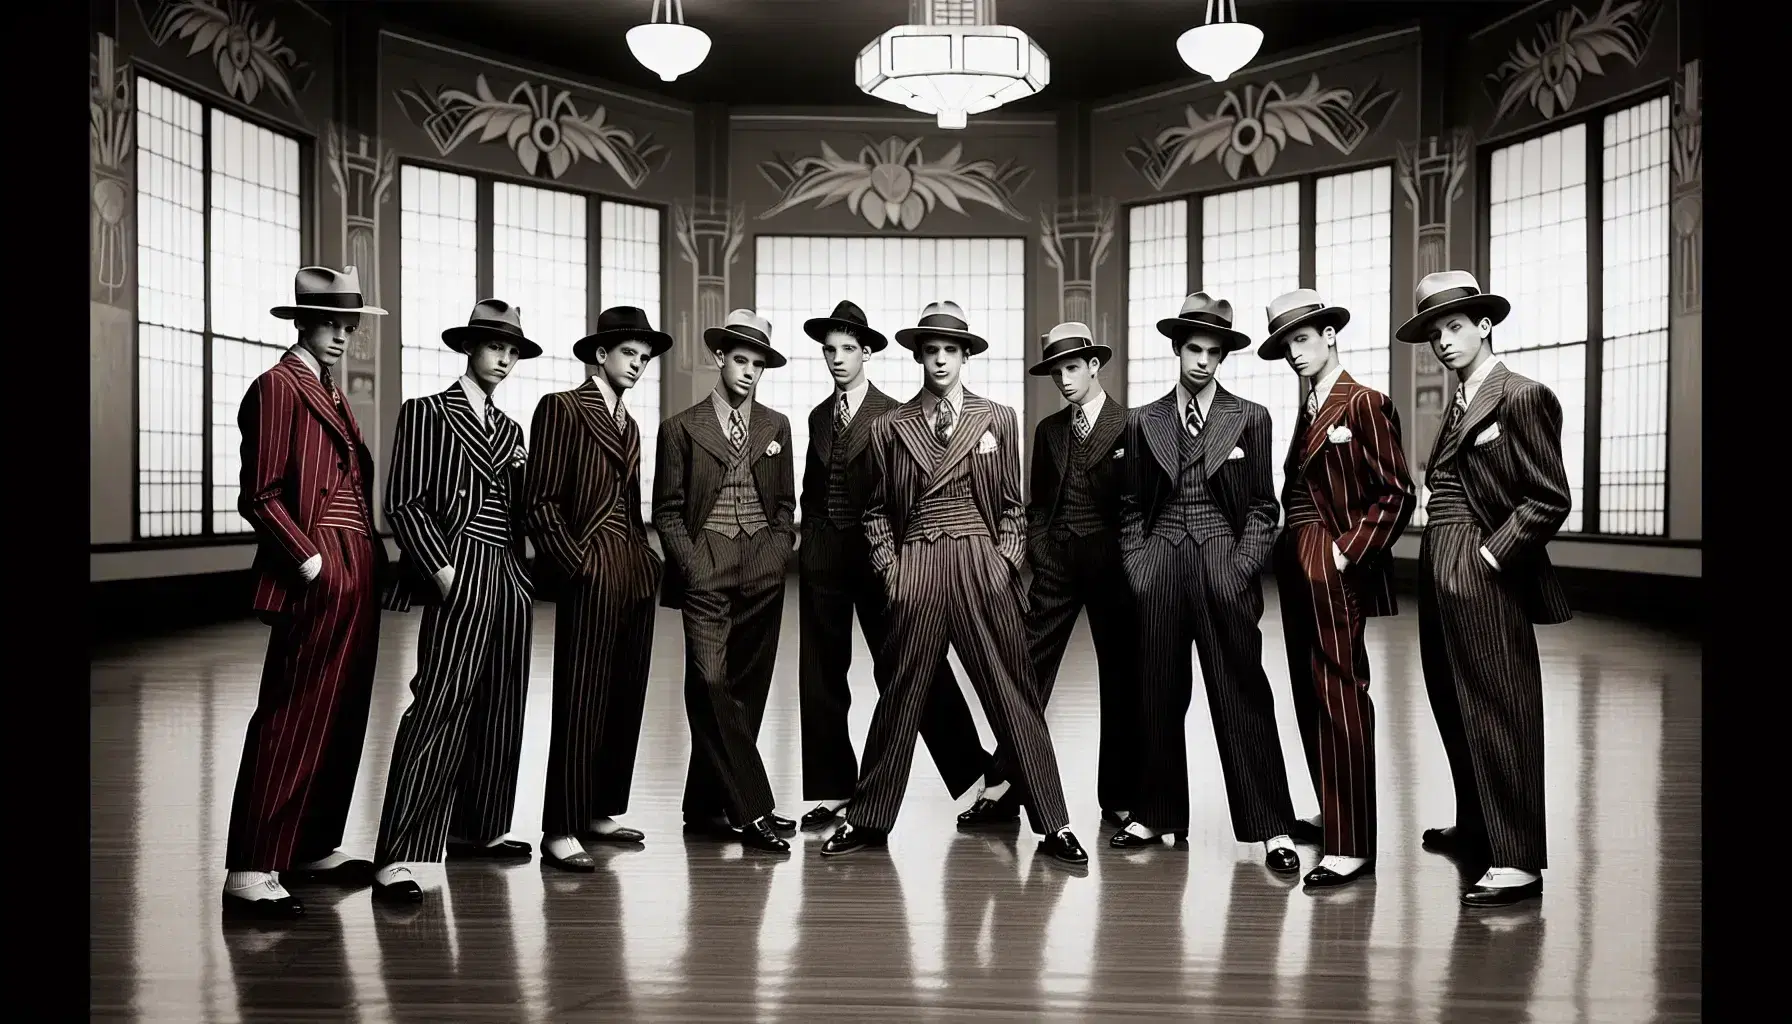 Young men in colorful zoot suits with wide-brimmed hats stand confidently in a dance hall, reflecting the vibrant zoot suit era.